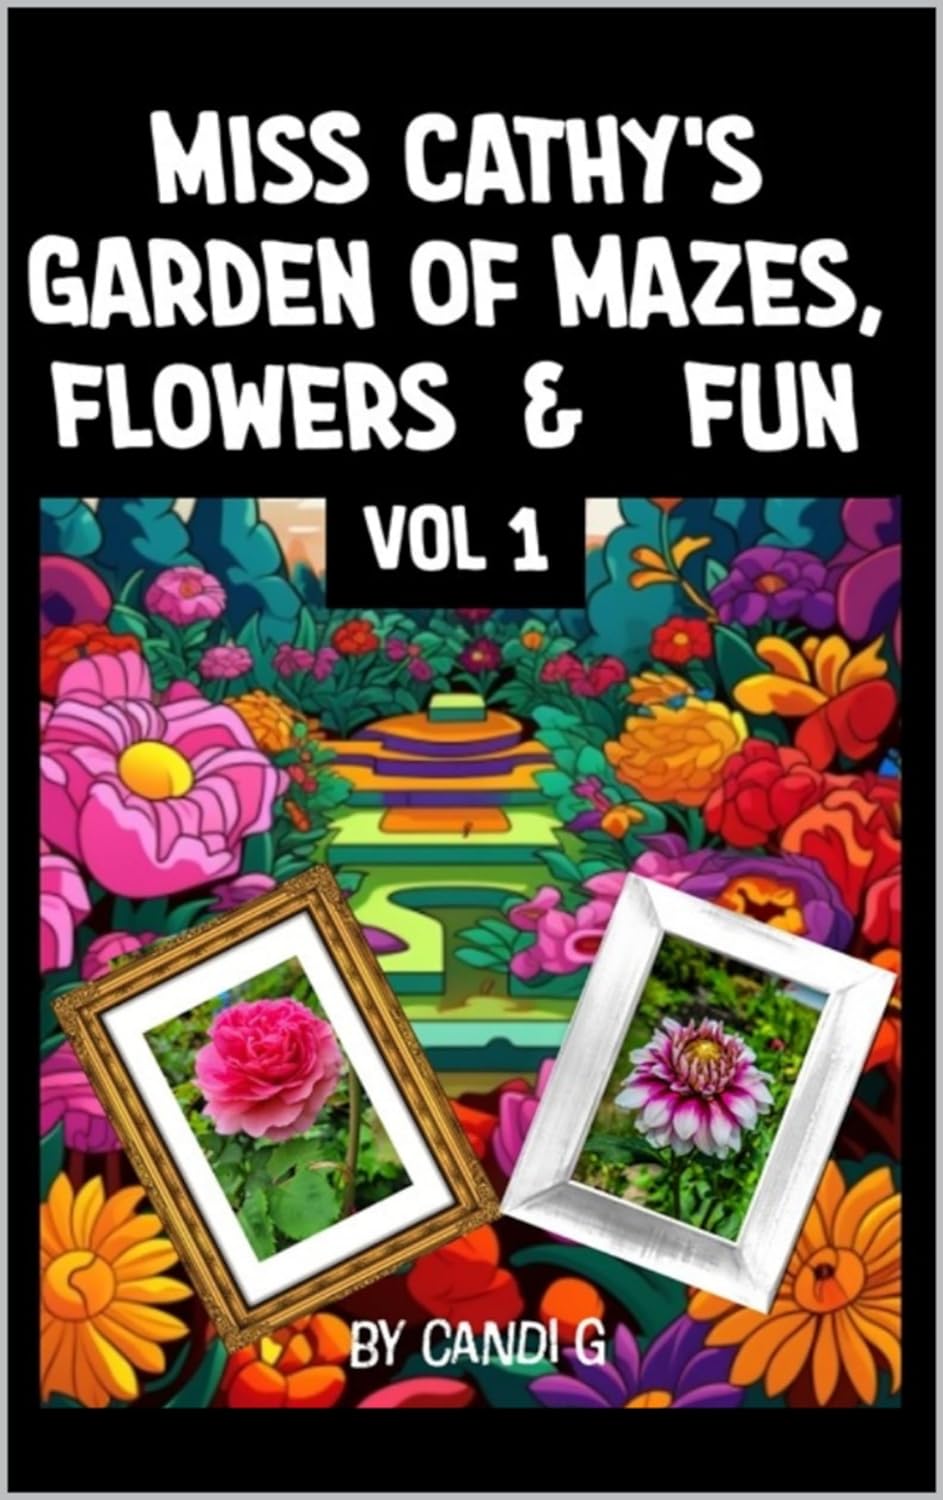 Miss Cathy's Garden of Mazes, Flowers & Fun by Candi G